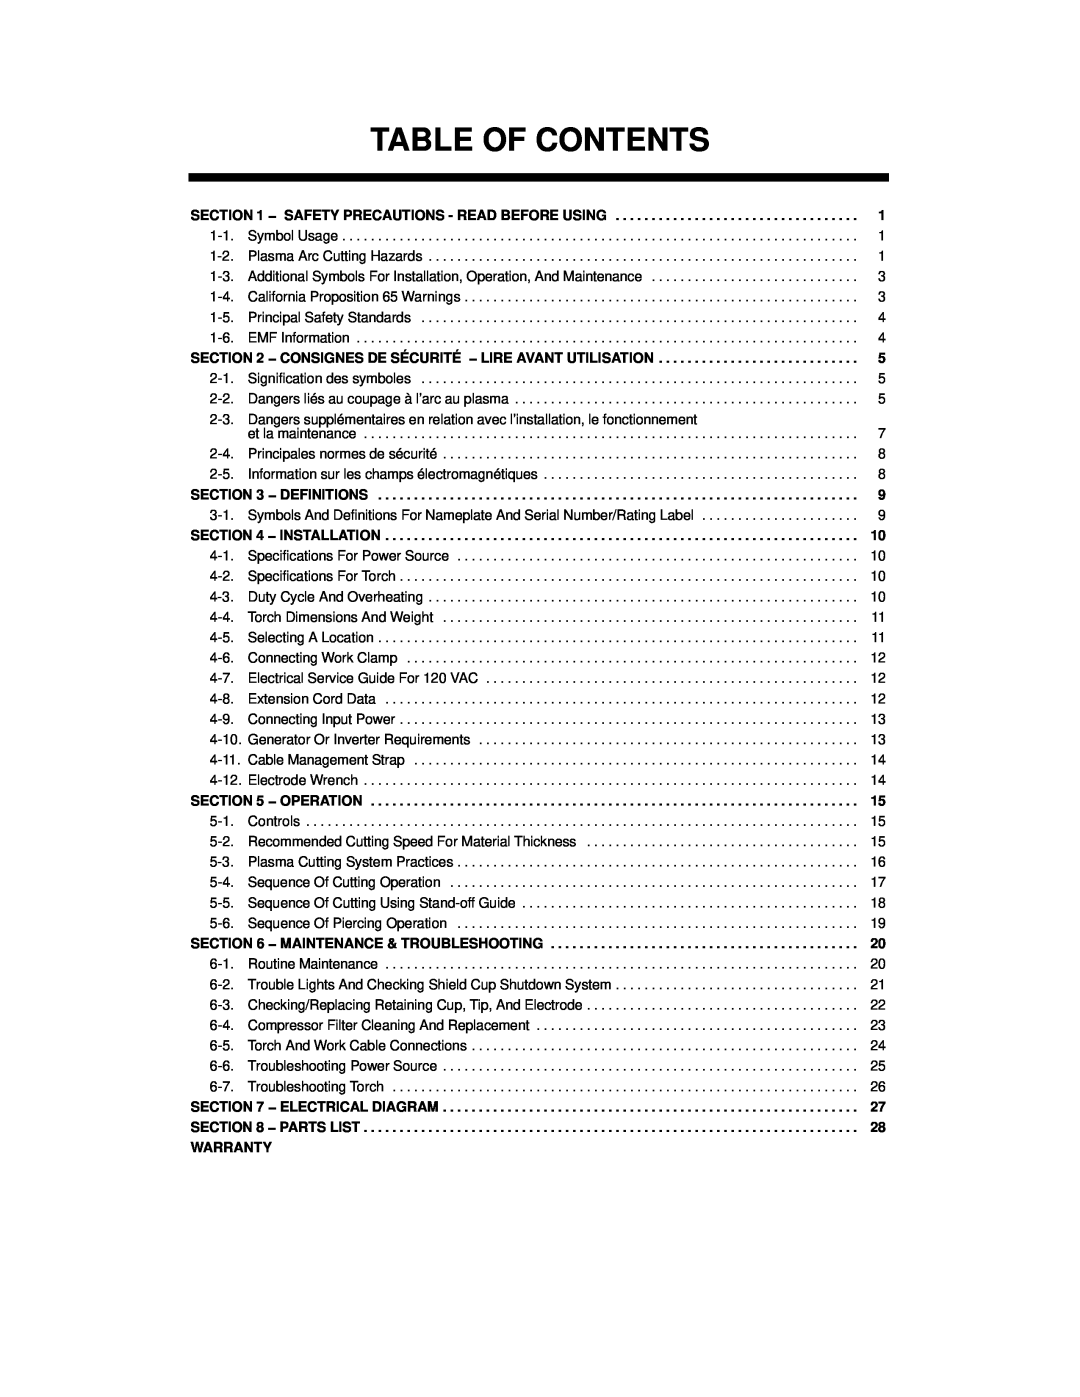 Hobart Welding Products OM-230 455D manual Table Of Contents, Safety Precautions - Read Before Using, Operation, Warranty 